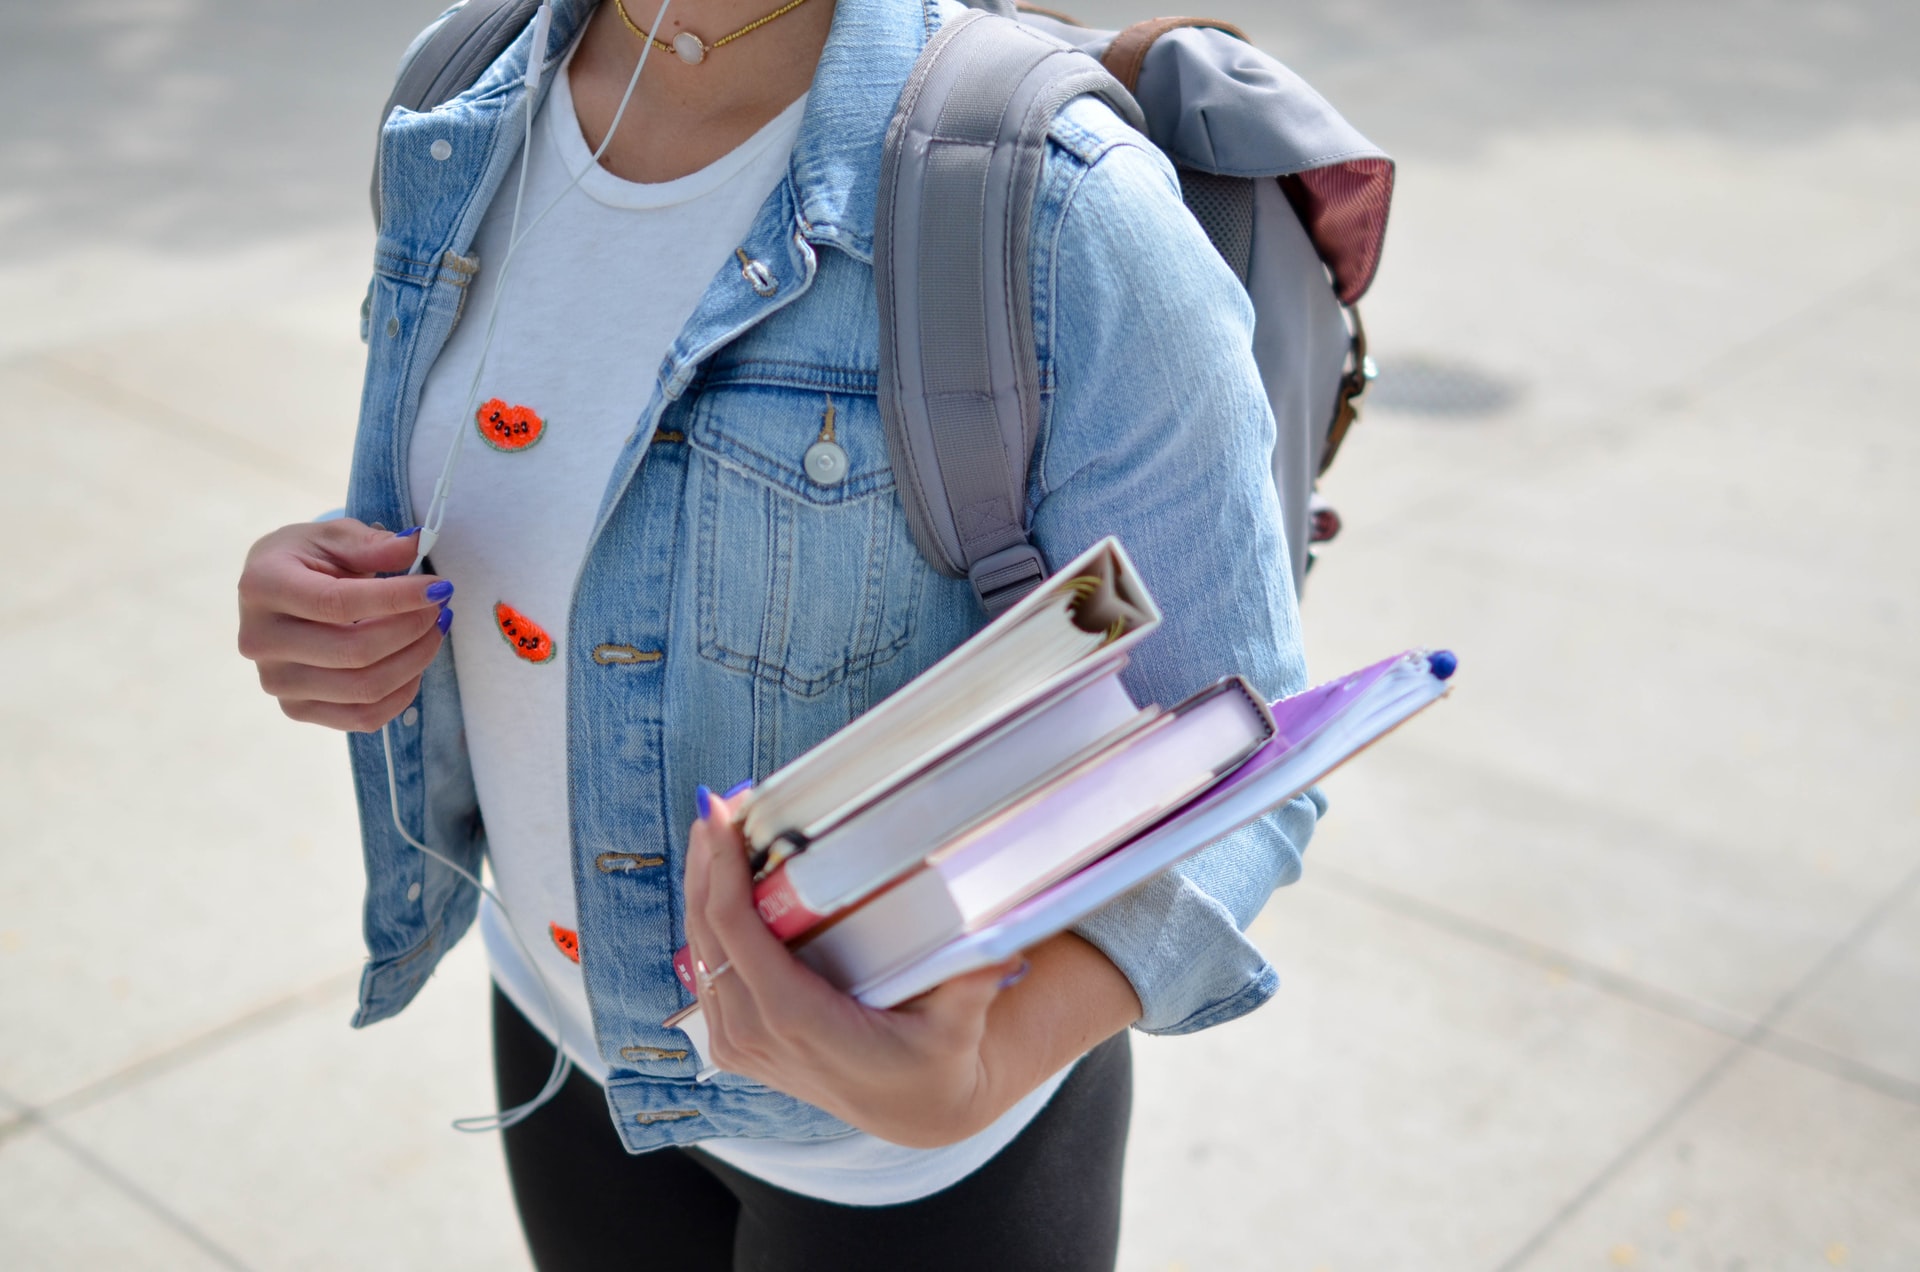 Woman wearing denim jacket and earbuds, carrying books